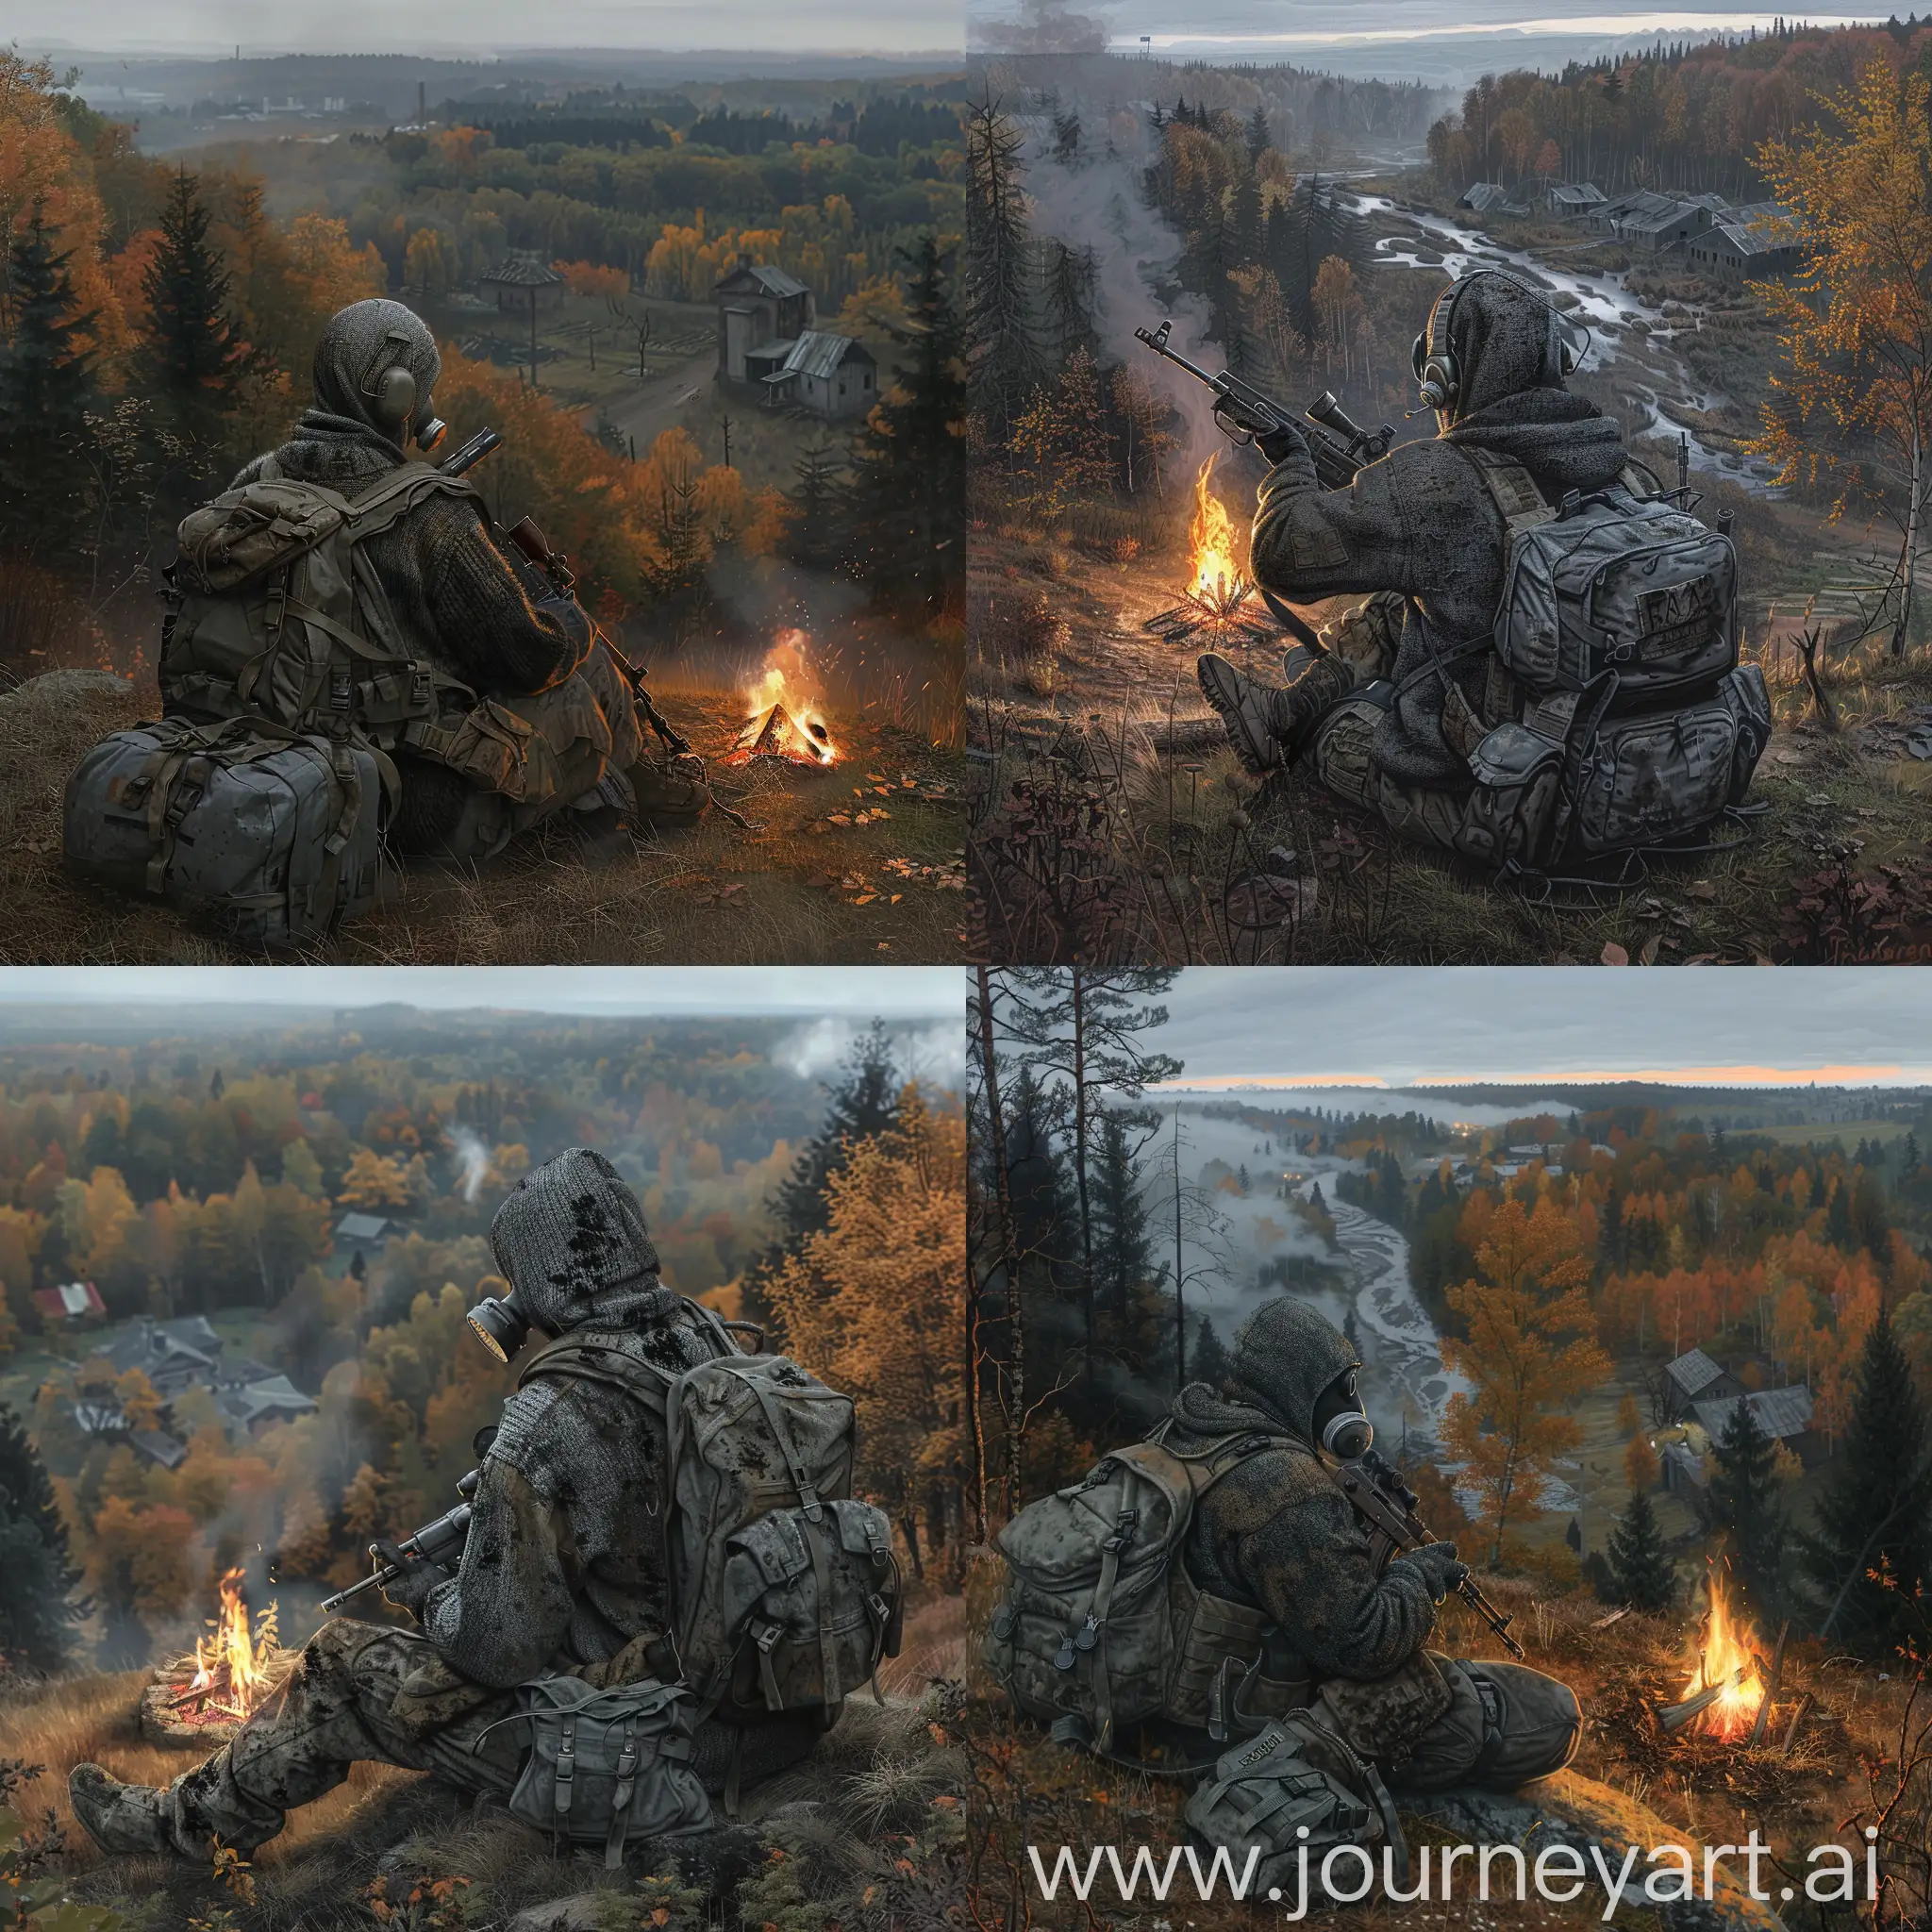 Stalker-Sitting-by-Campfire-in-Gloomy-Autumn-Setting